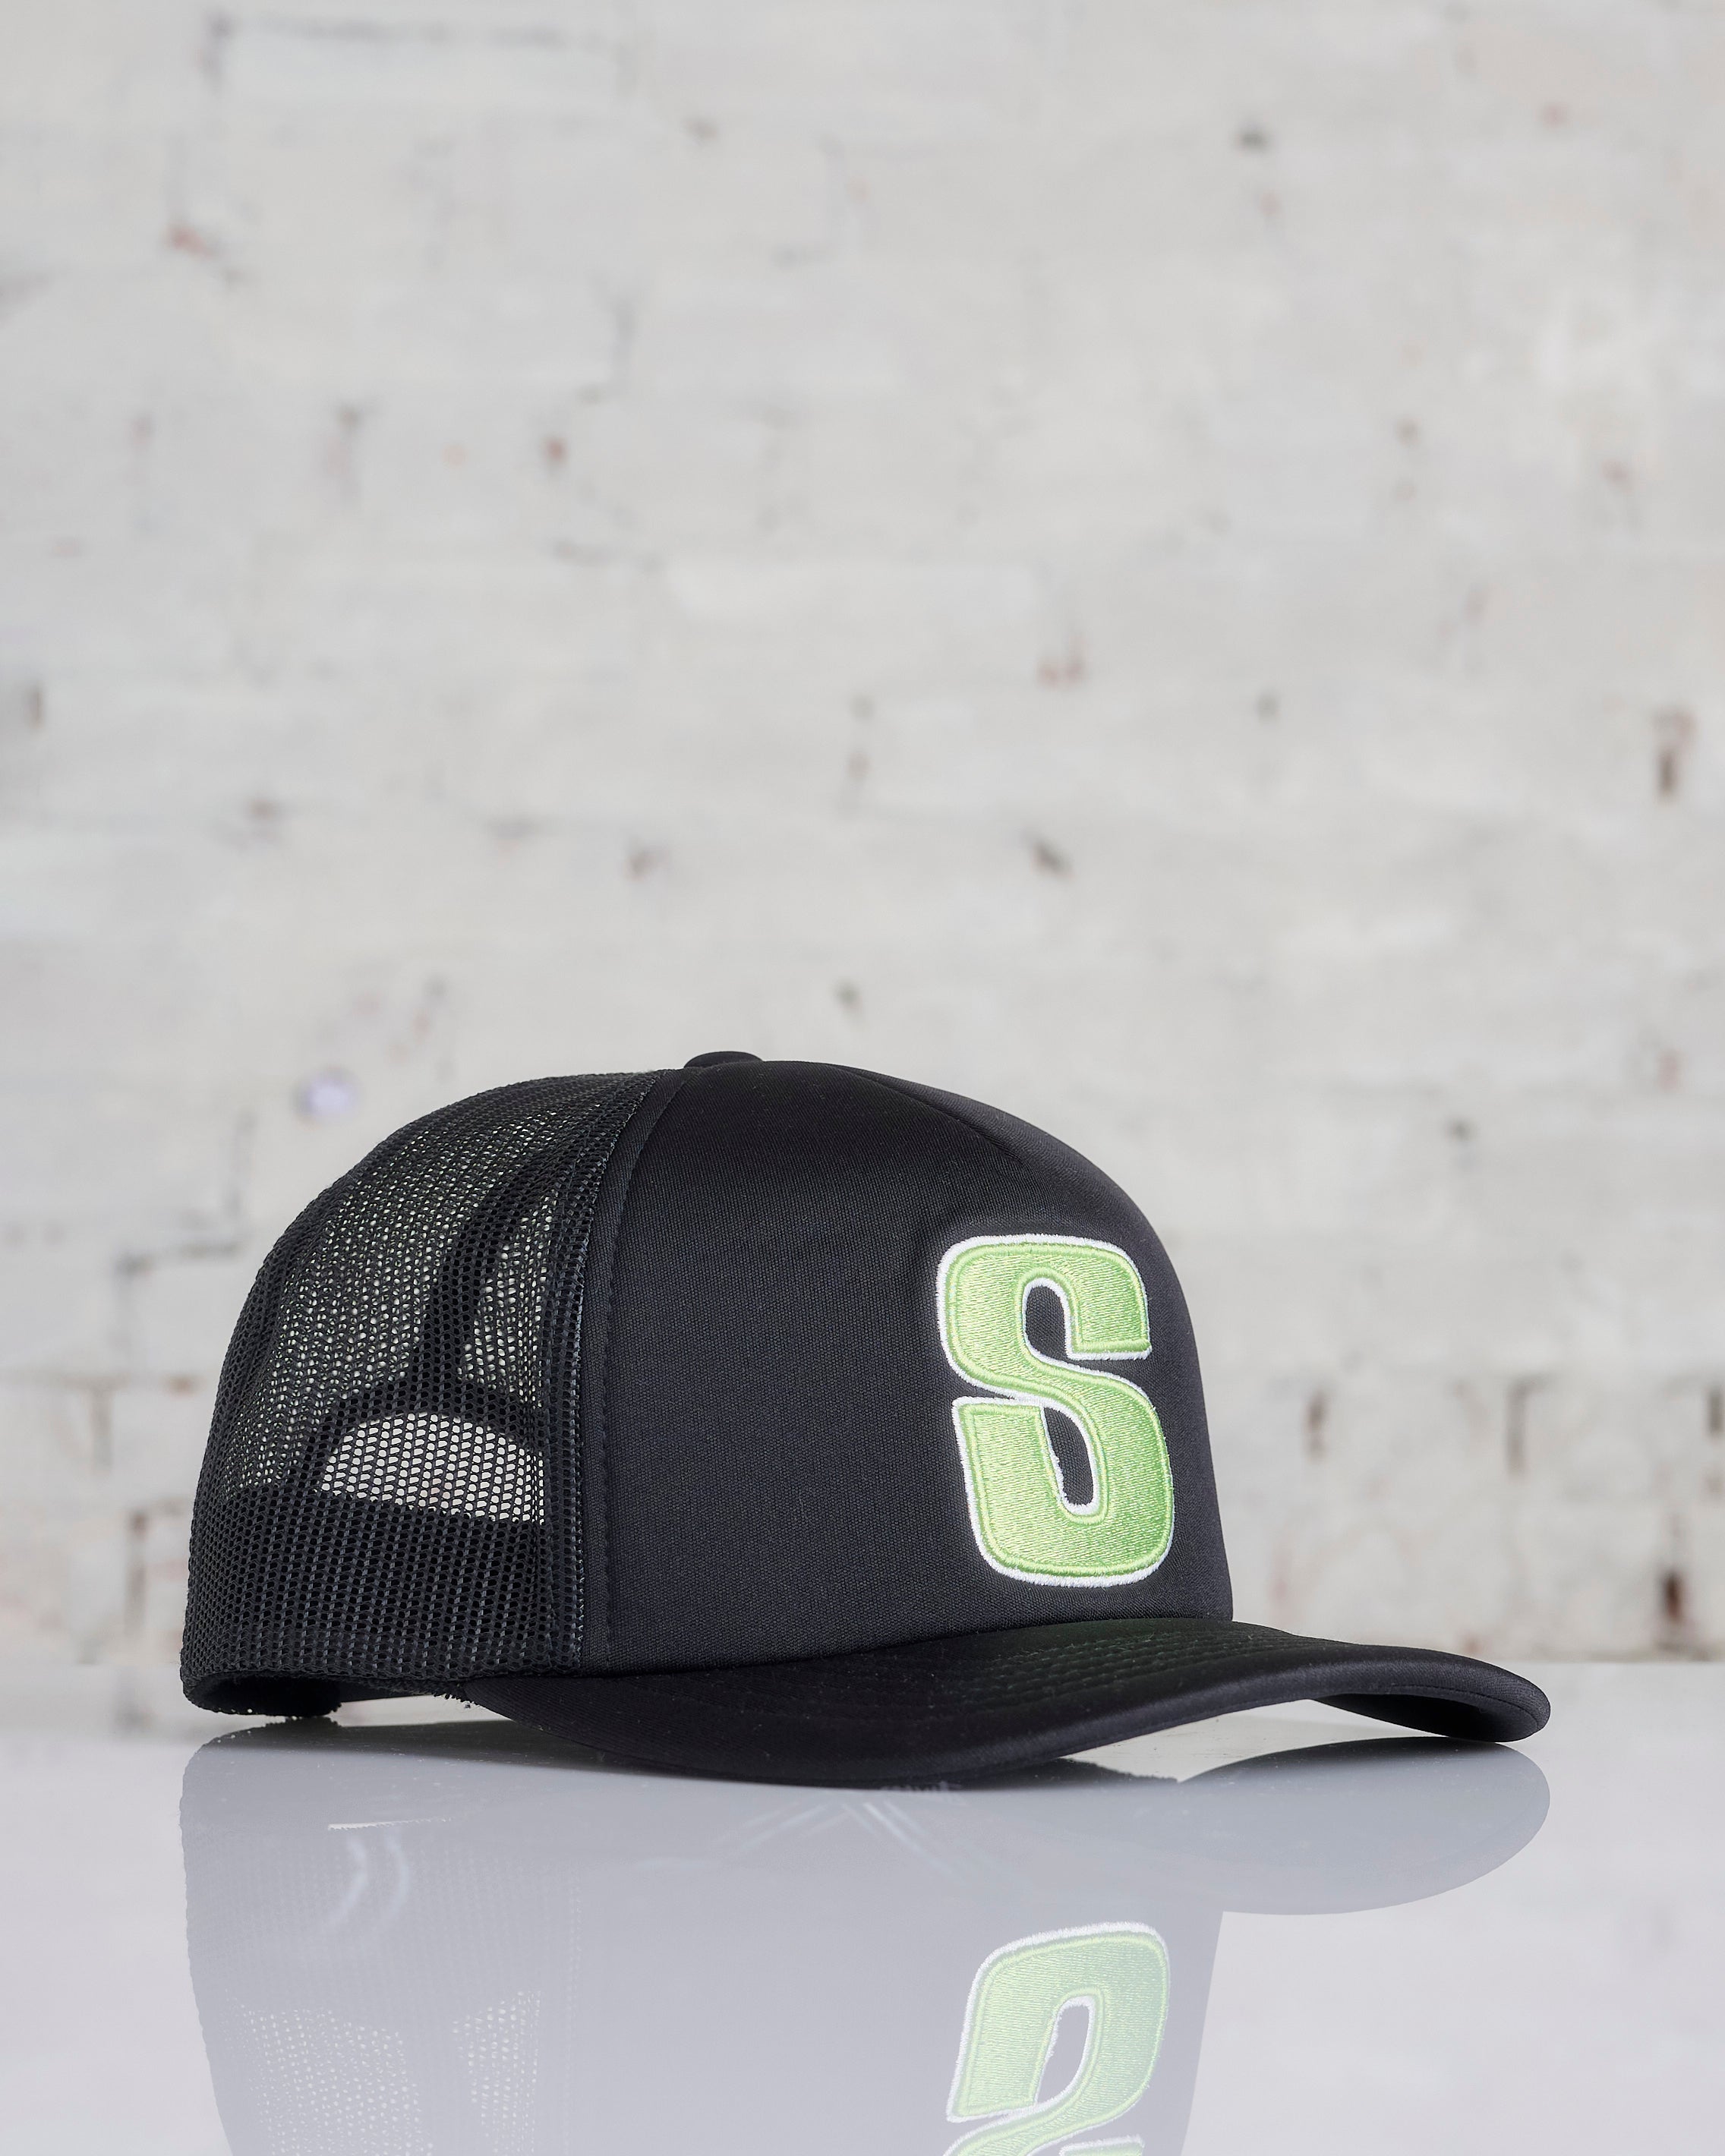 Dark Green Baseball Hats for Men with Big Heads | Big Hat Store